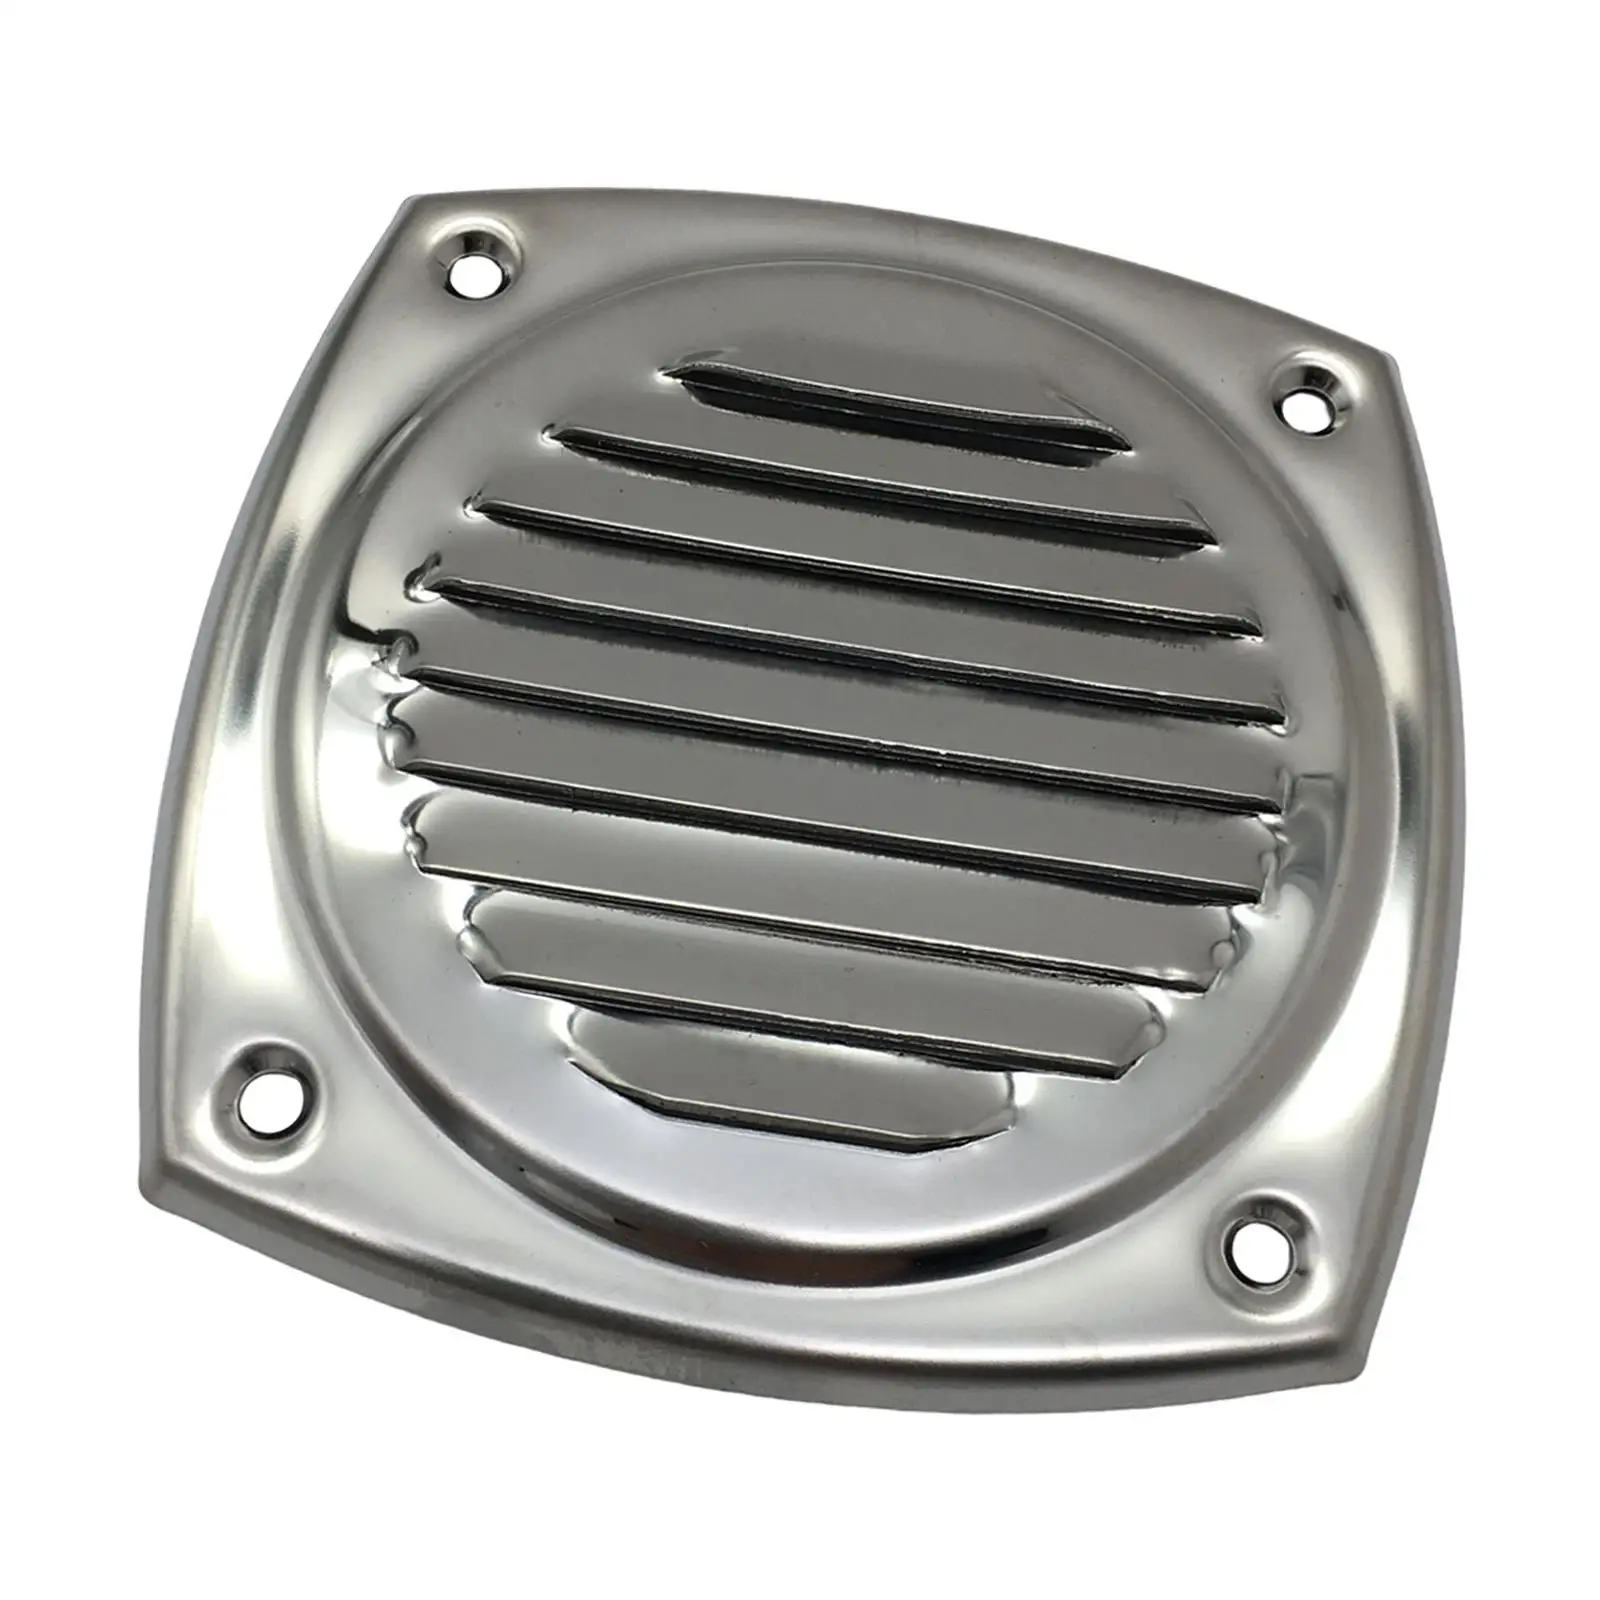 Vent Grille Stainless Hood for Boat Yacht Caravans